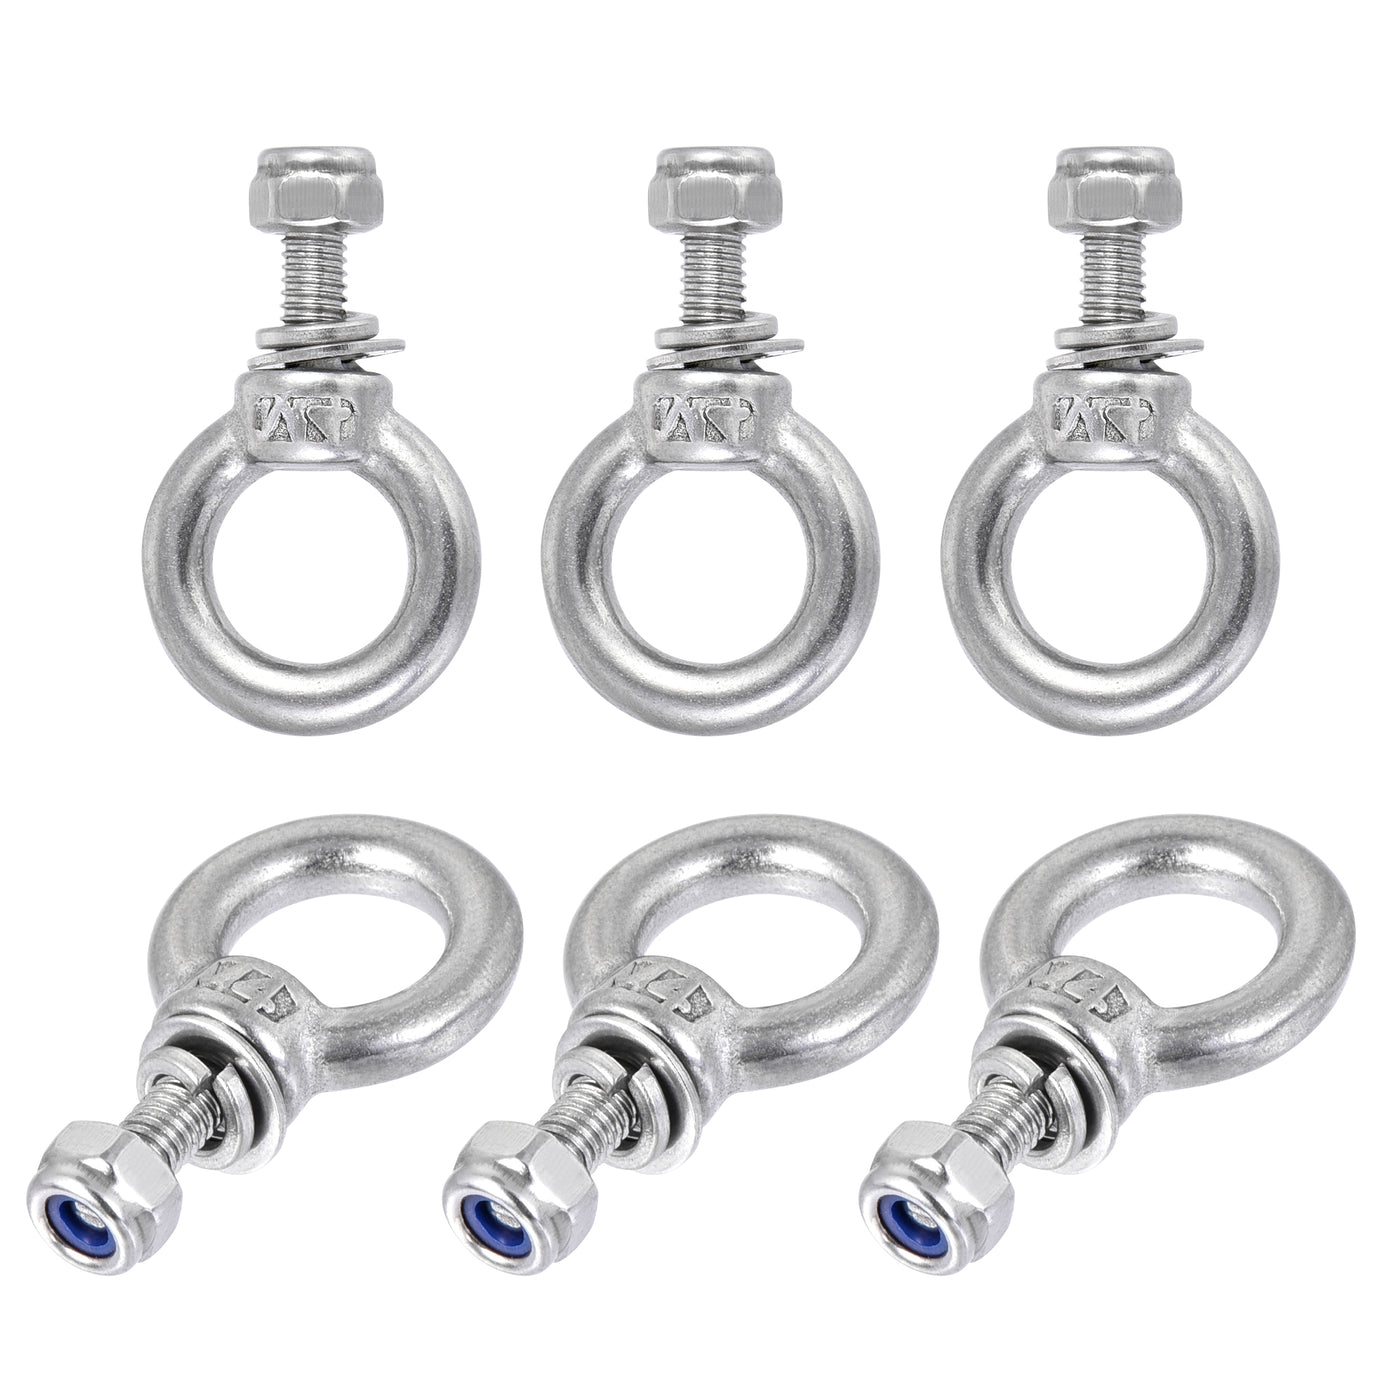 uxcell Uxcell Lifting Eye Bolt M4 x 11mm Male Thread with Hex Screw Nut Gasket Flat Washer for Hanging, 304 Stainless Steel, 6 Sets